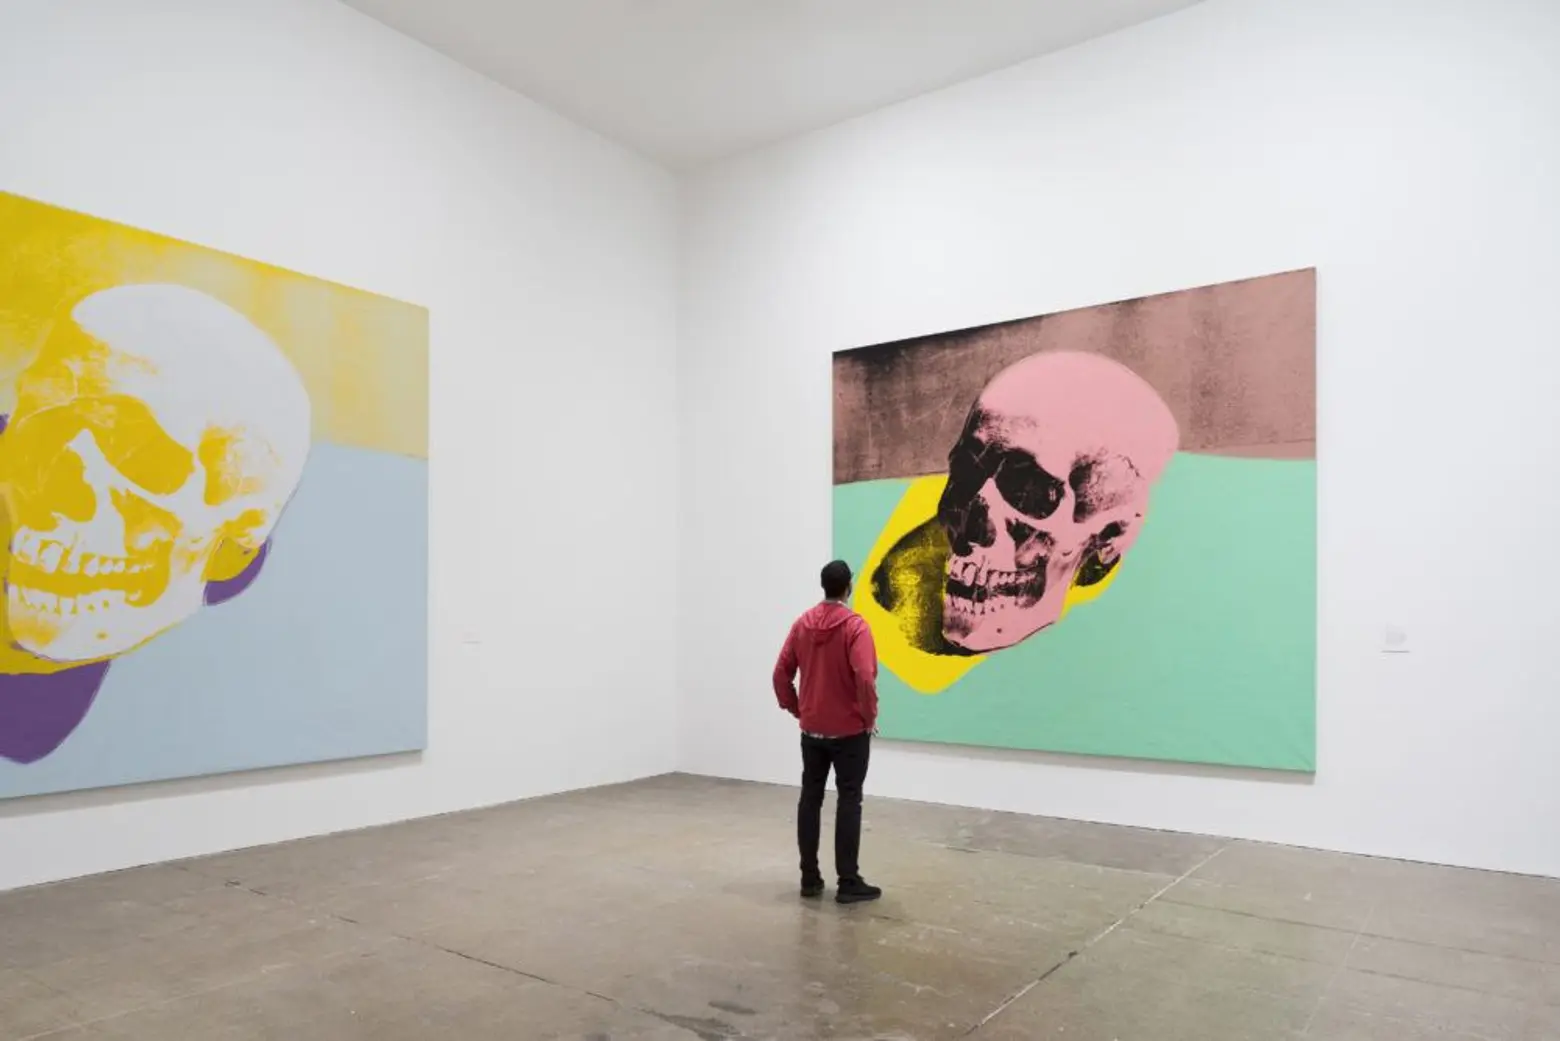 andy warhol museum, andy warhol, andy warhol retrospective, andy warhol whitney museum